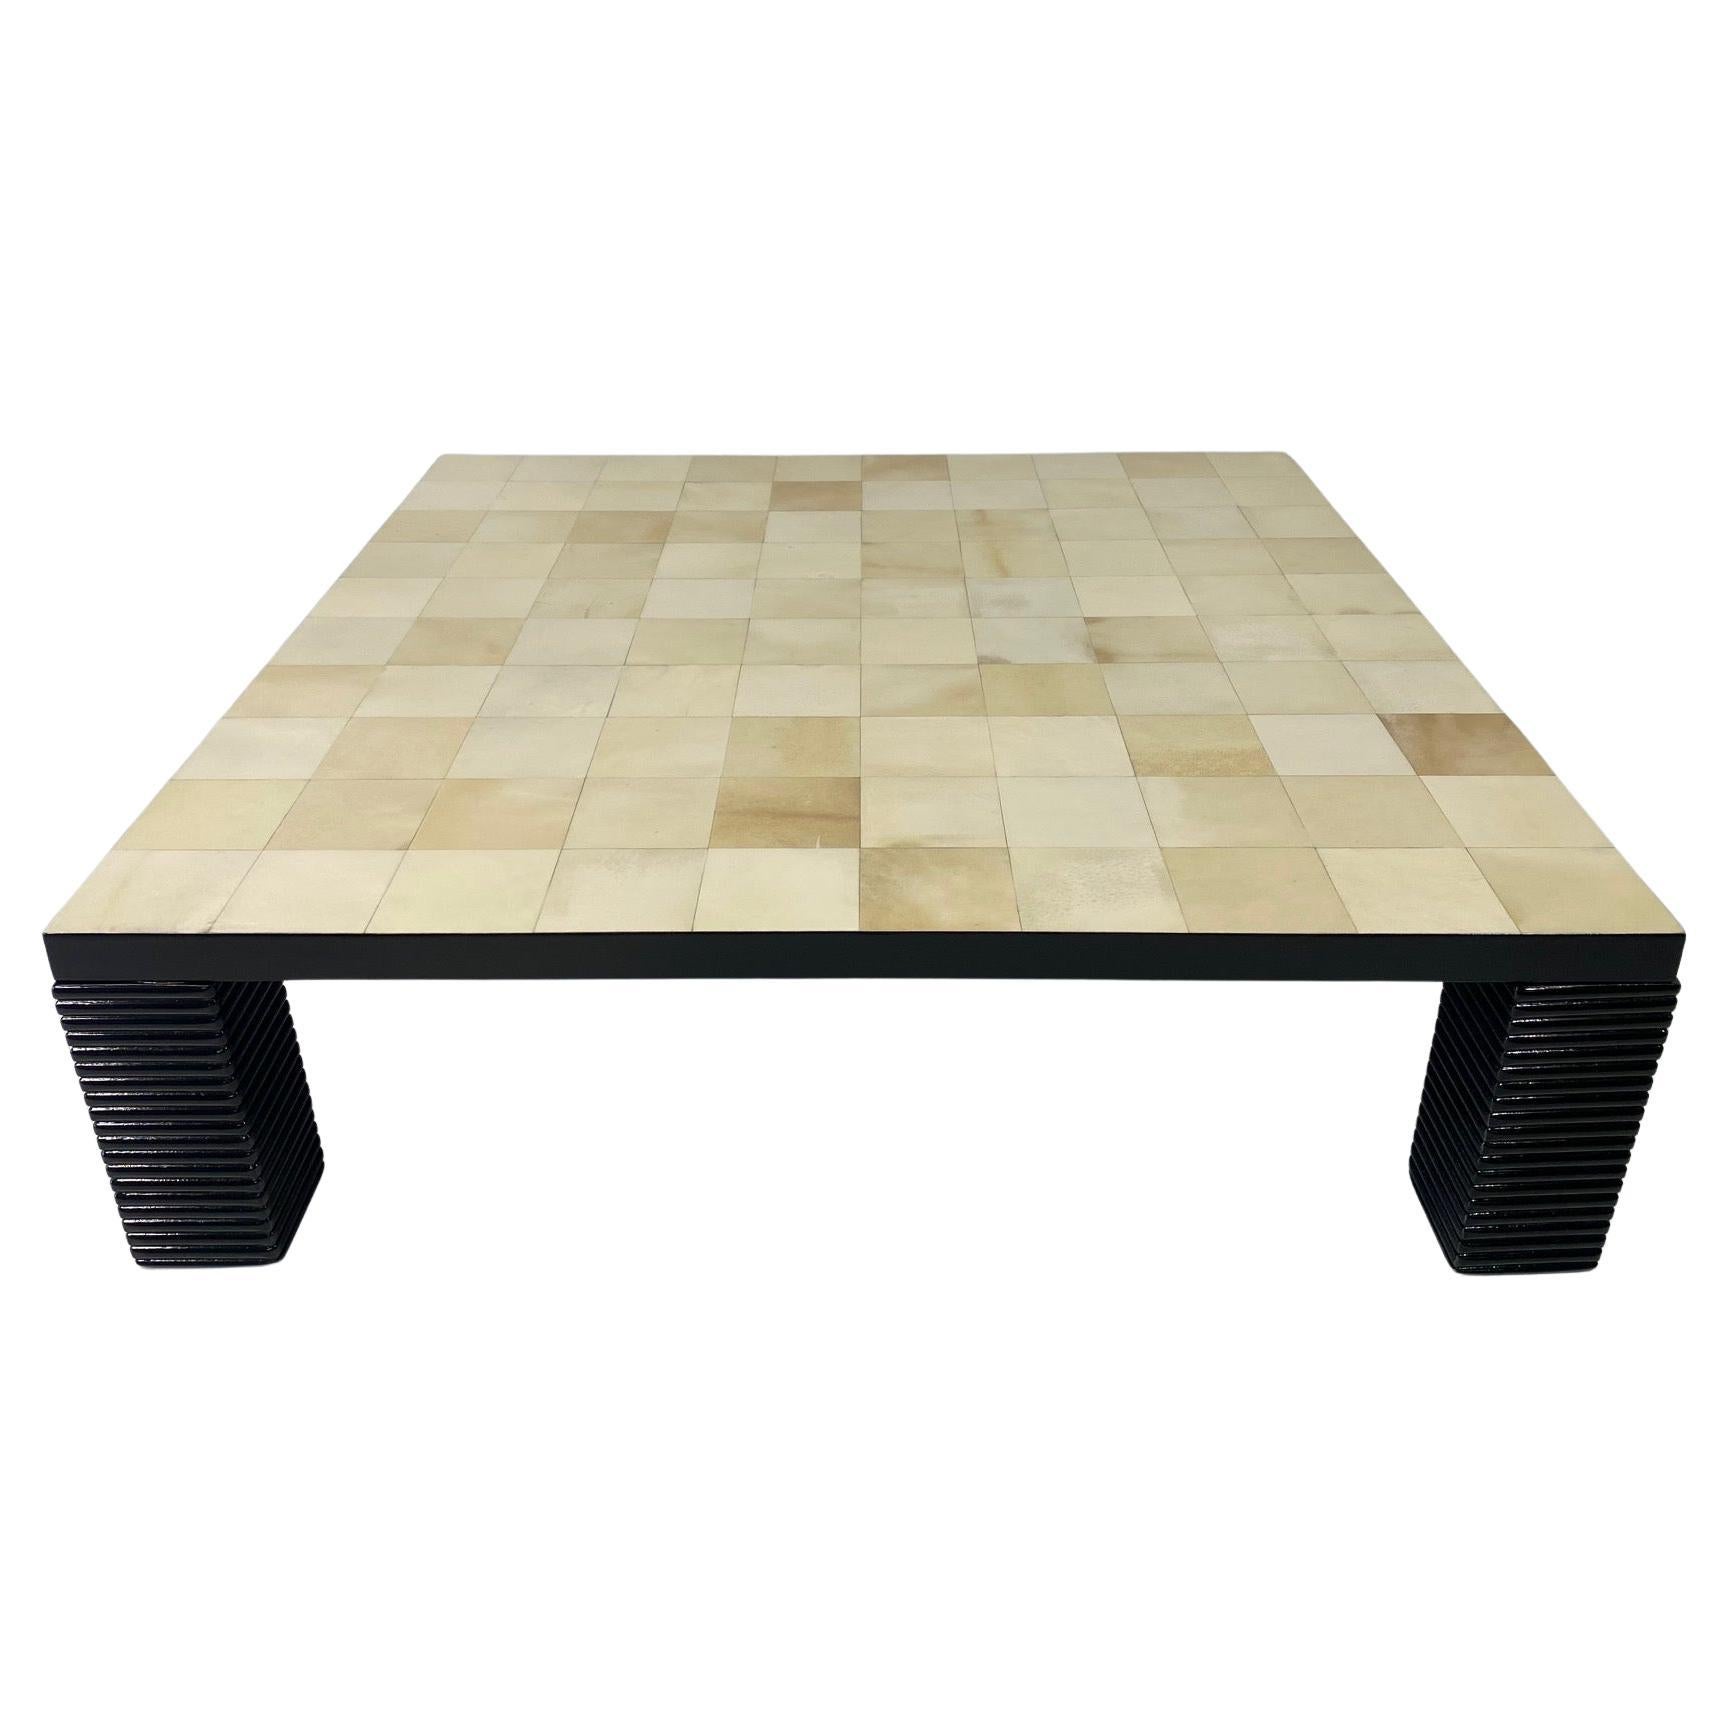 Italian Art Deco Parchment squares and Black Lacquered Coffee Table For Sale